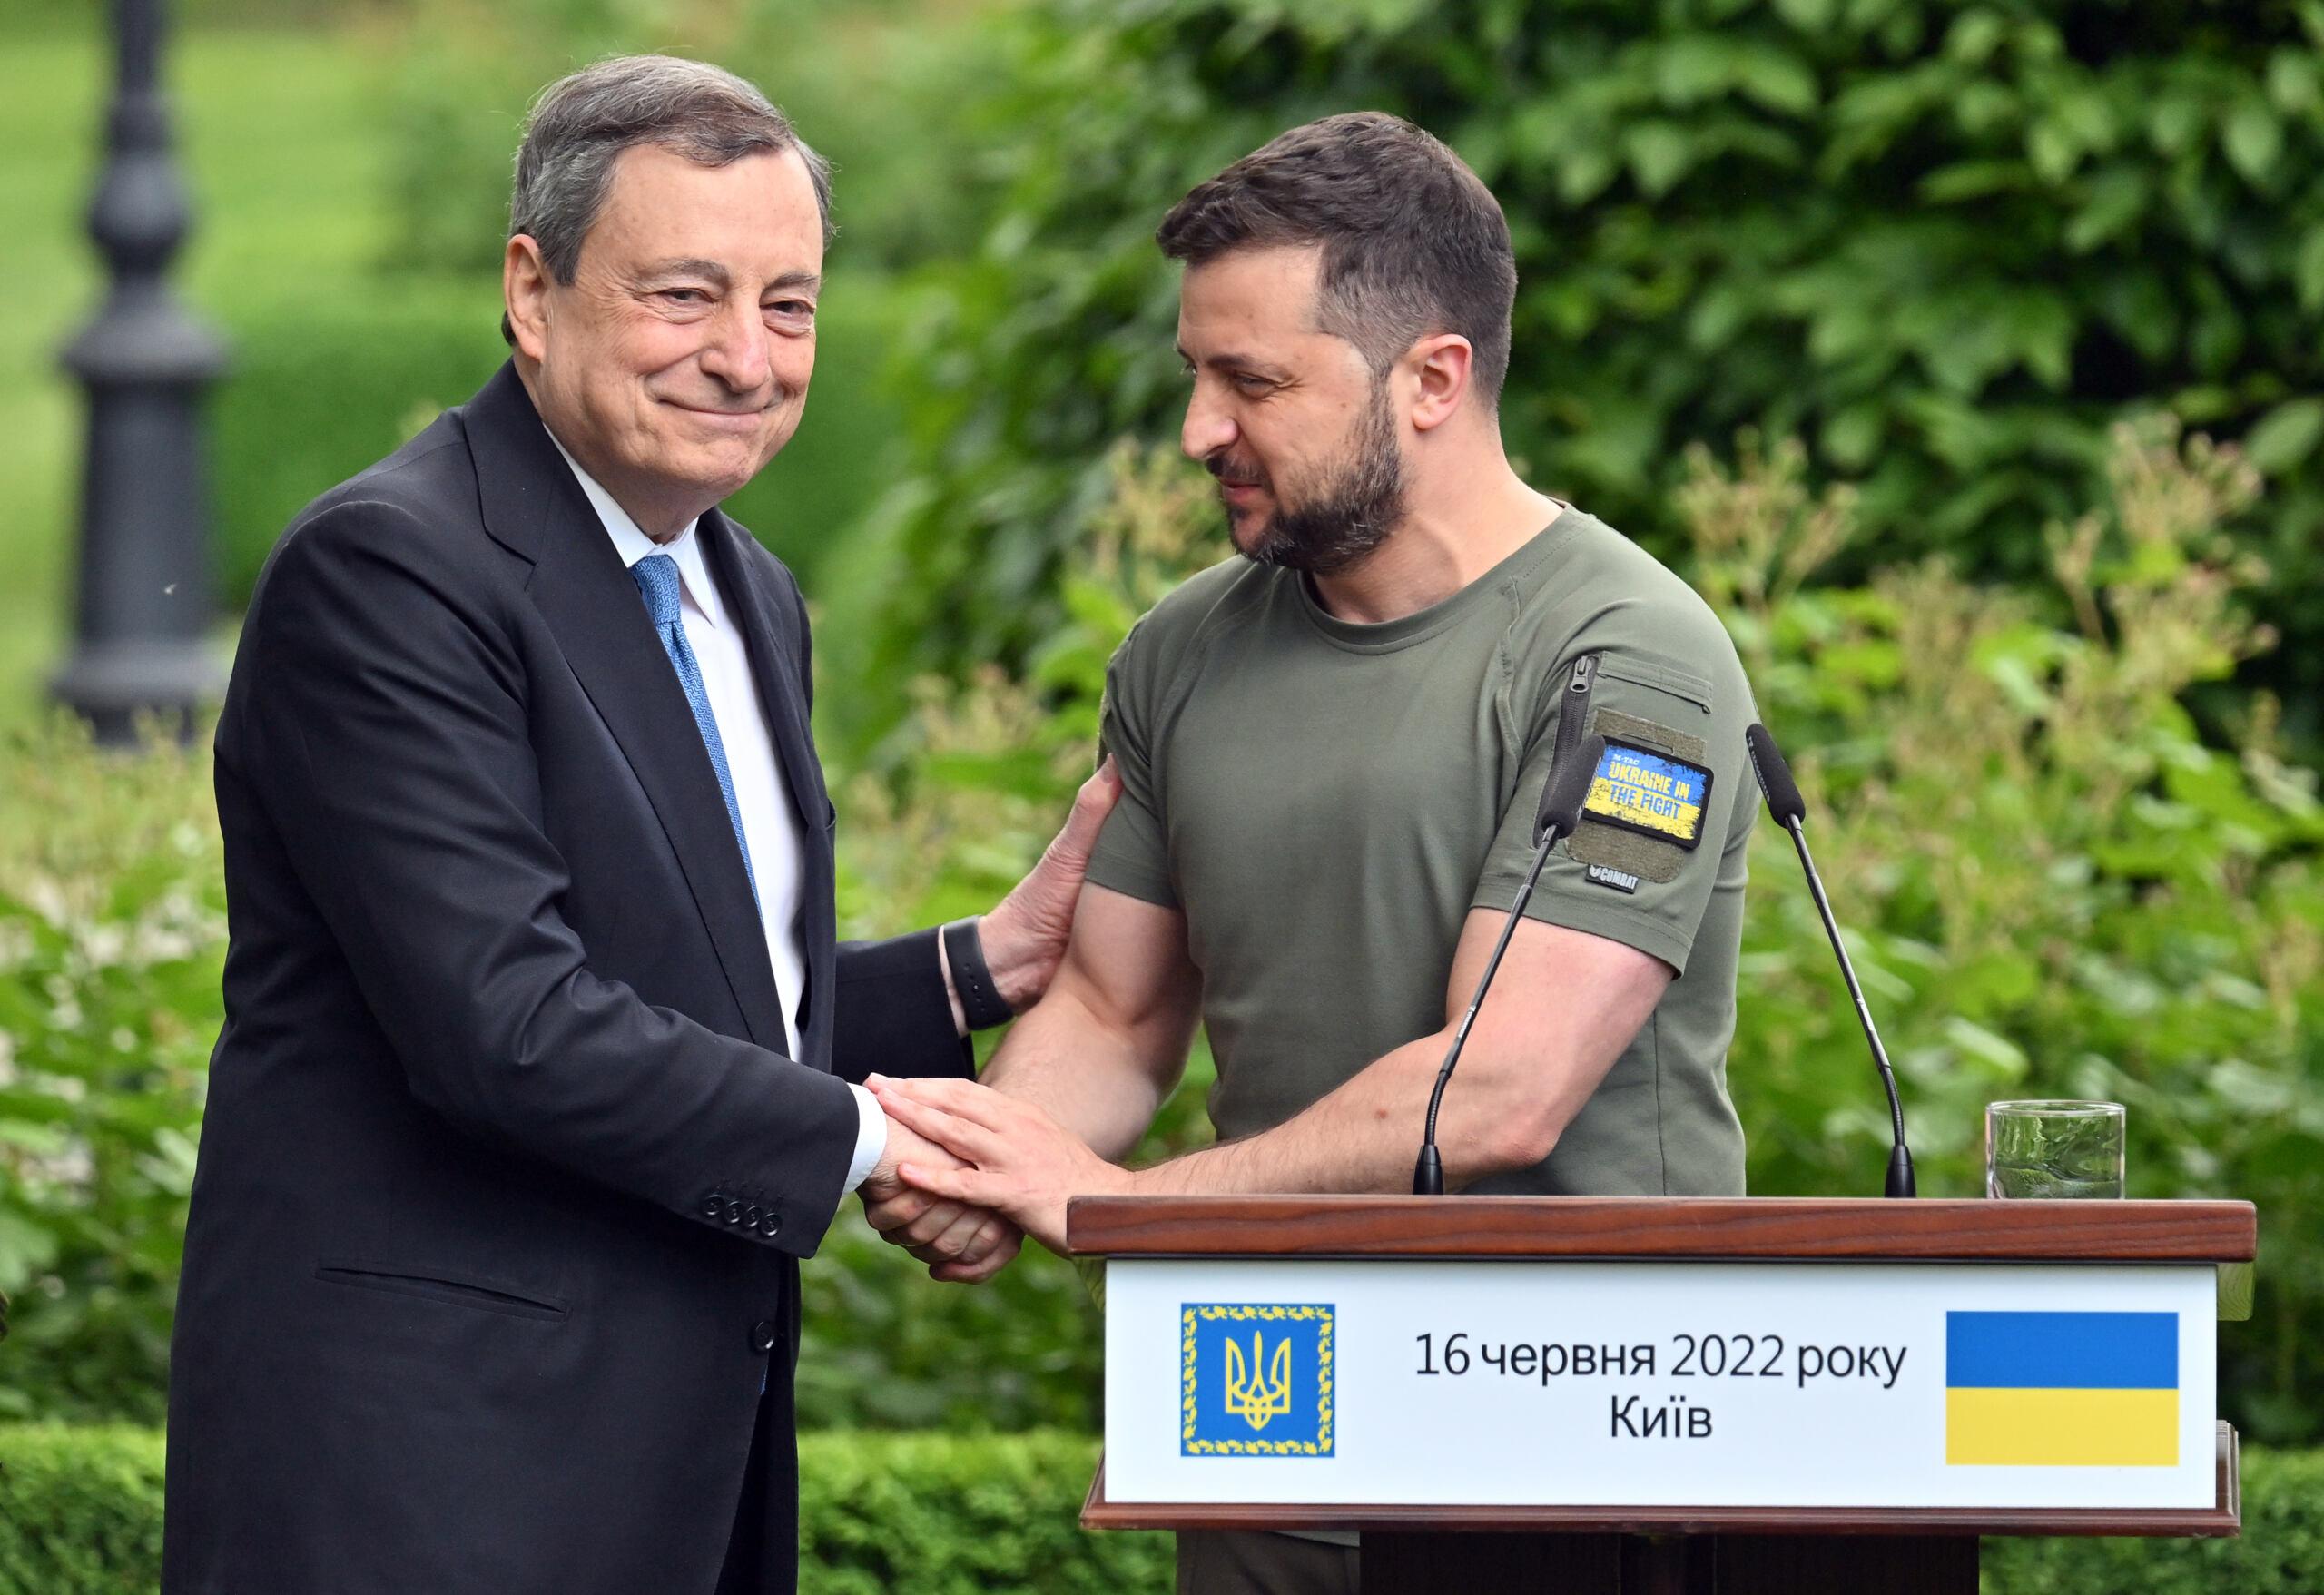 Prime minister of Italy Mario Draghi (L) shakes hands with Ukrainian President Volodymyr Zelensky following their meeting in Mariinsky Palace, in Kyiv, on June 16, 2022. - The European Union's most powerful leaders on June 16 embraced Ukraine's bid to be accepted as a candidate for EU membership, in a powerful symbol of support in Kyiv's battle against Russia's invasion. (Photo by Sergei SUPINSKY / AFP)